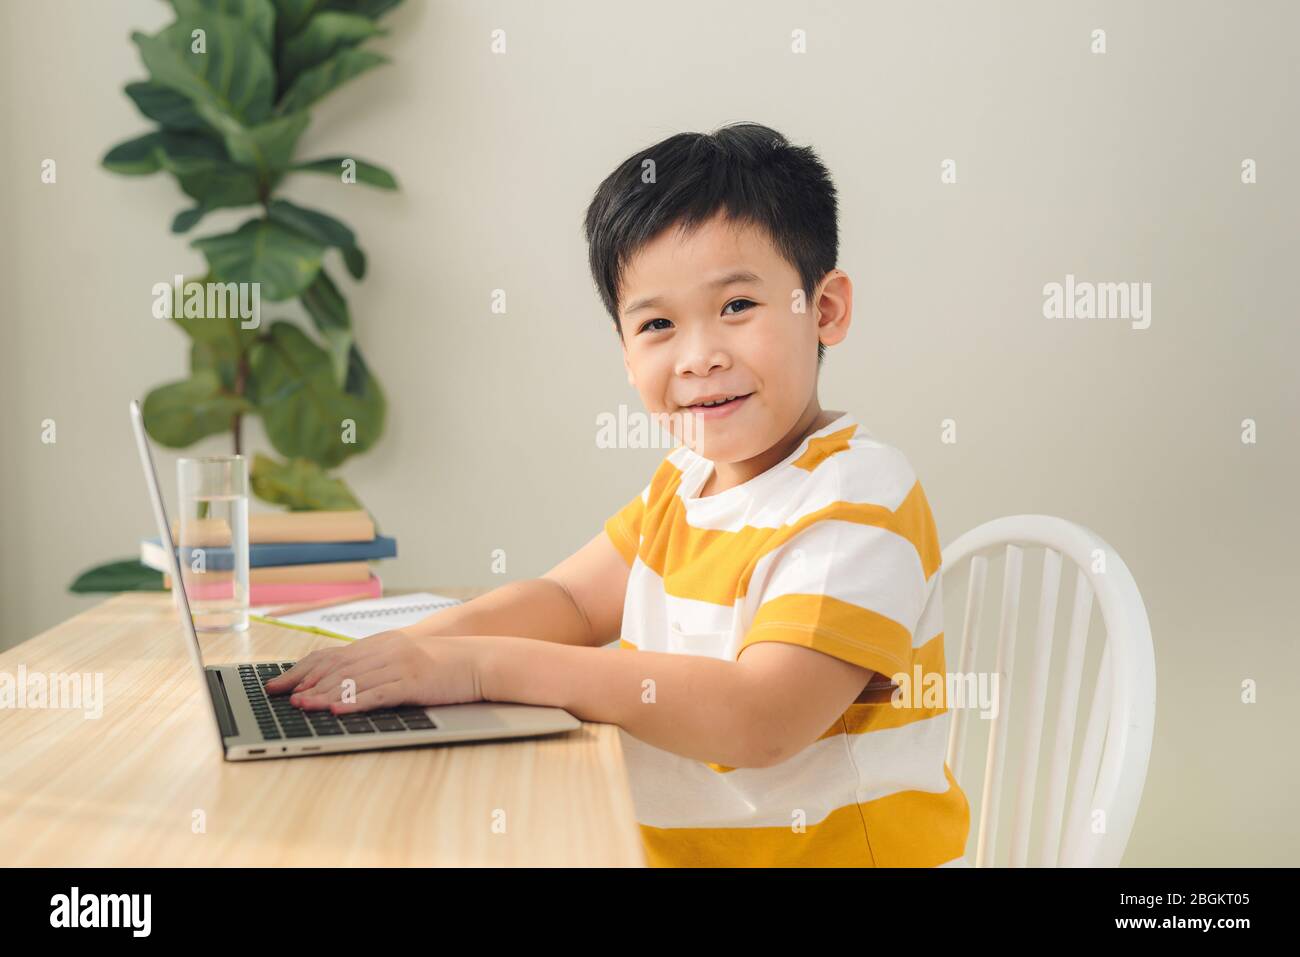 Smart looking Asian preteen boy writing and using computer laptop studying online lessons. Stock Photo